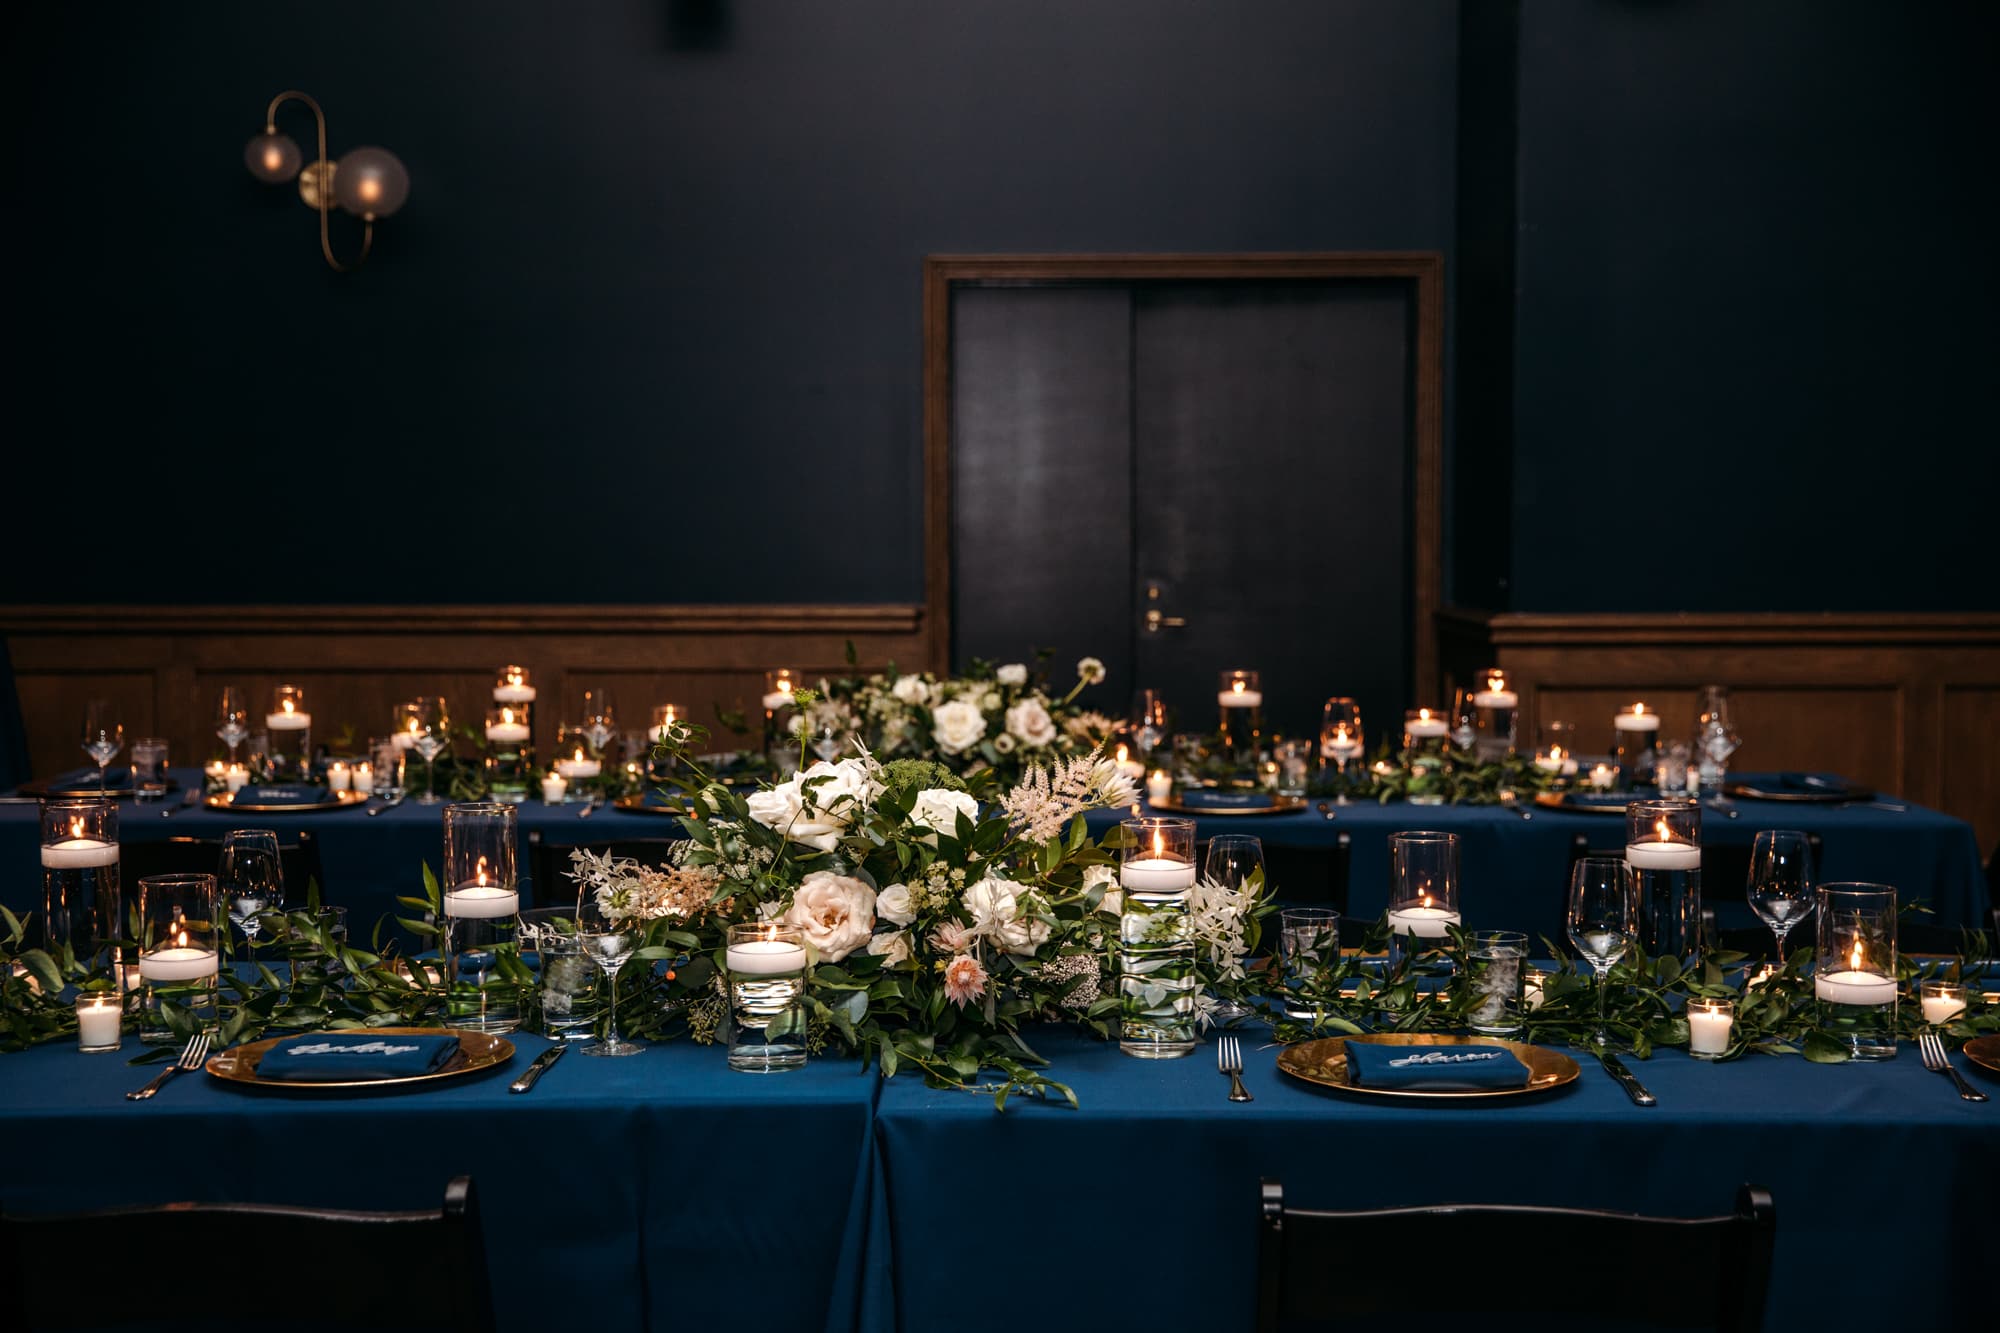 blue and green wedding colors, blue and white wedding colors, blue and gold wedding colors, wedding tablescape, modern wedding tablescape, white table florals, gold and navy blue wedding, modern wedding decor, ramble hotel wedding, hotel wedding, denver wedding photographer, denver wedding planner